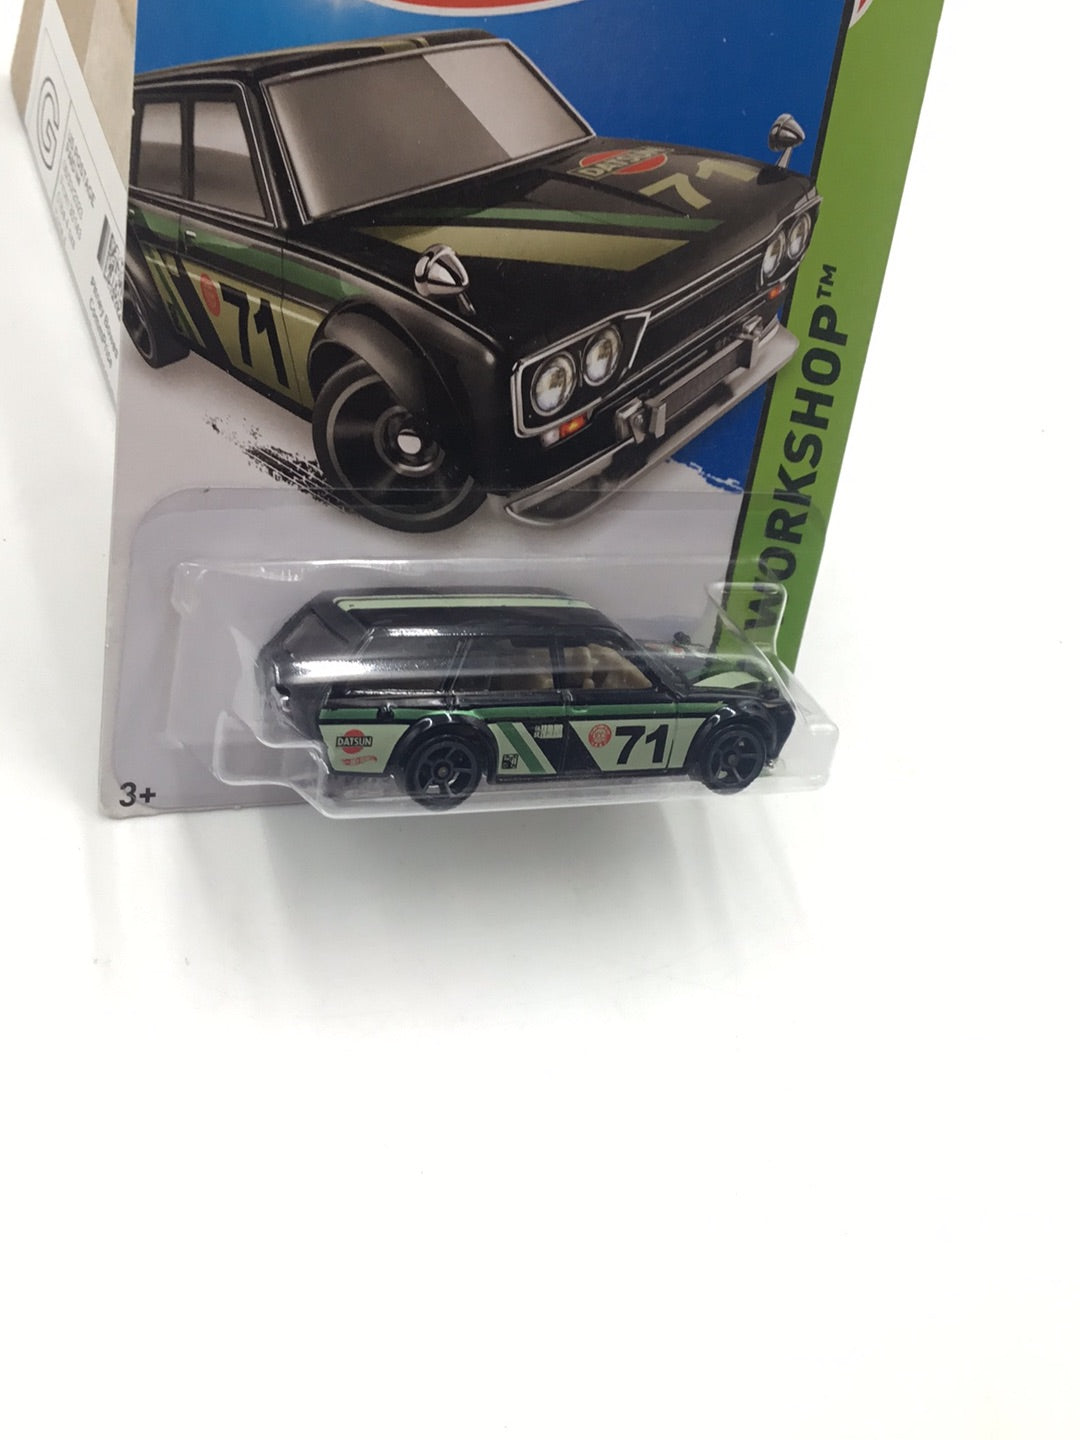 Hot Wheels 2017 71 Datsun Bluebird 510 wagon Kmart exclusive with protector